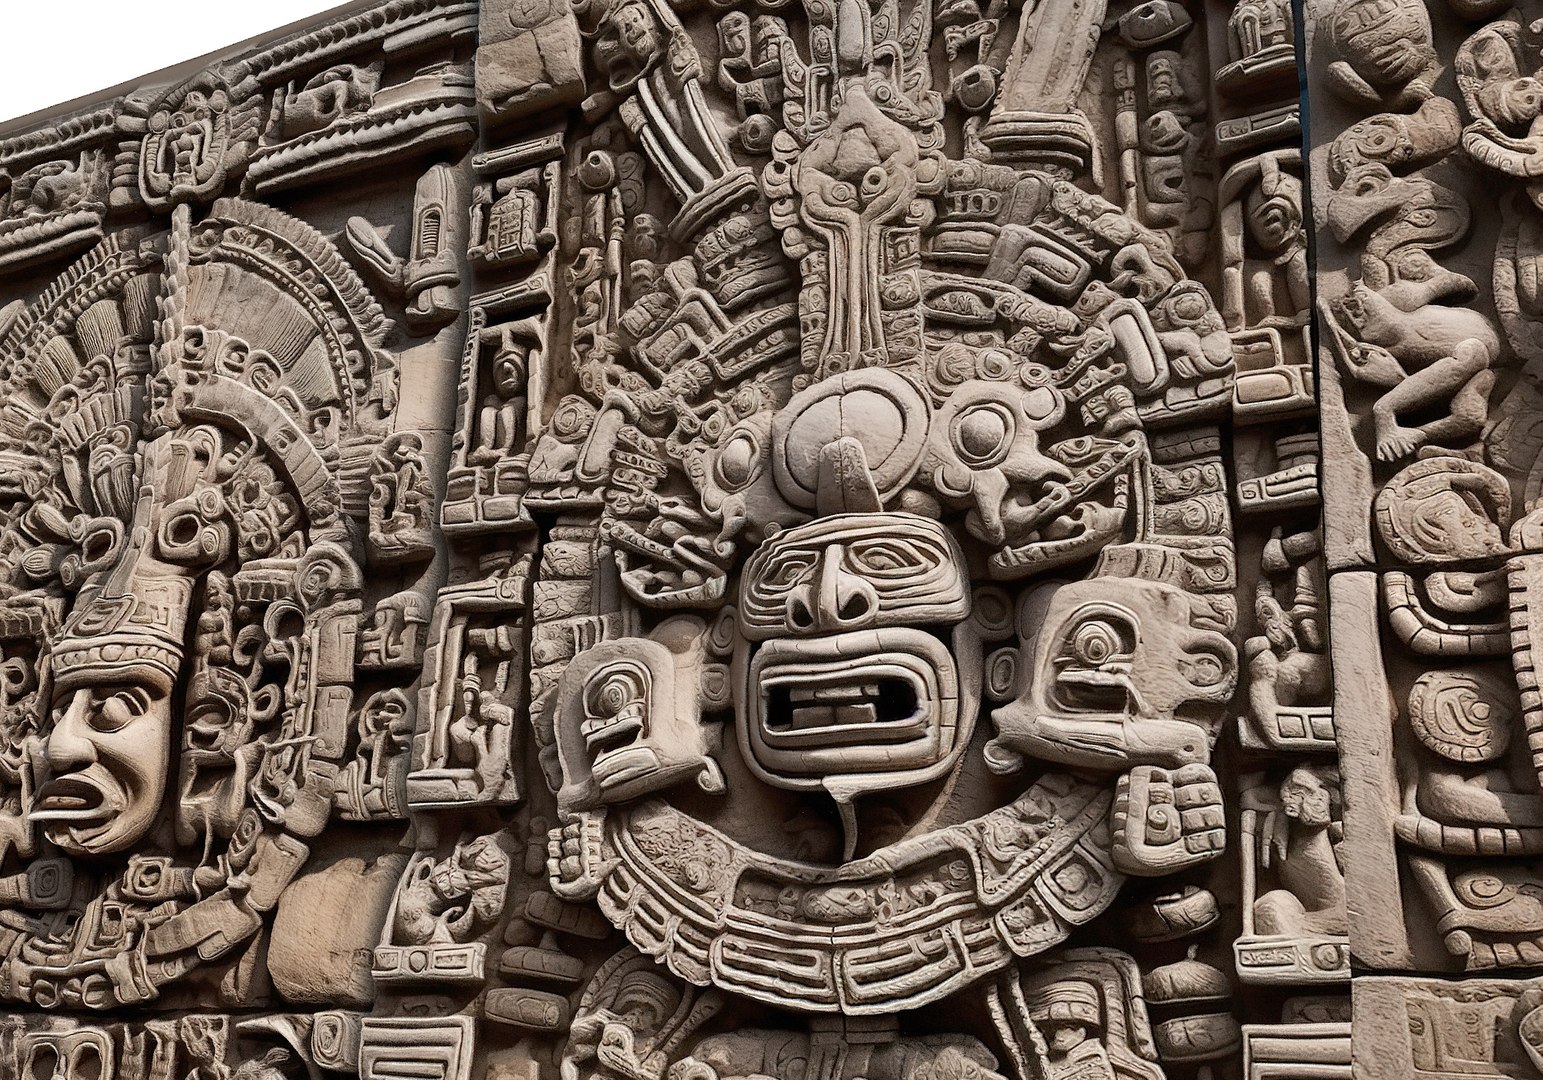 3D Walls of Ancient Mayan Architecture 2 - TurboSquid 2066598